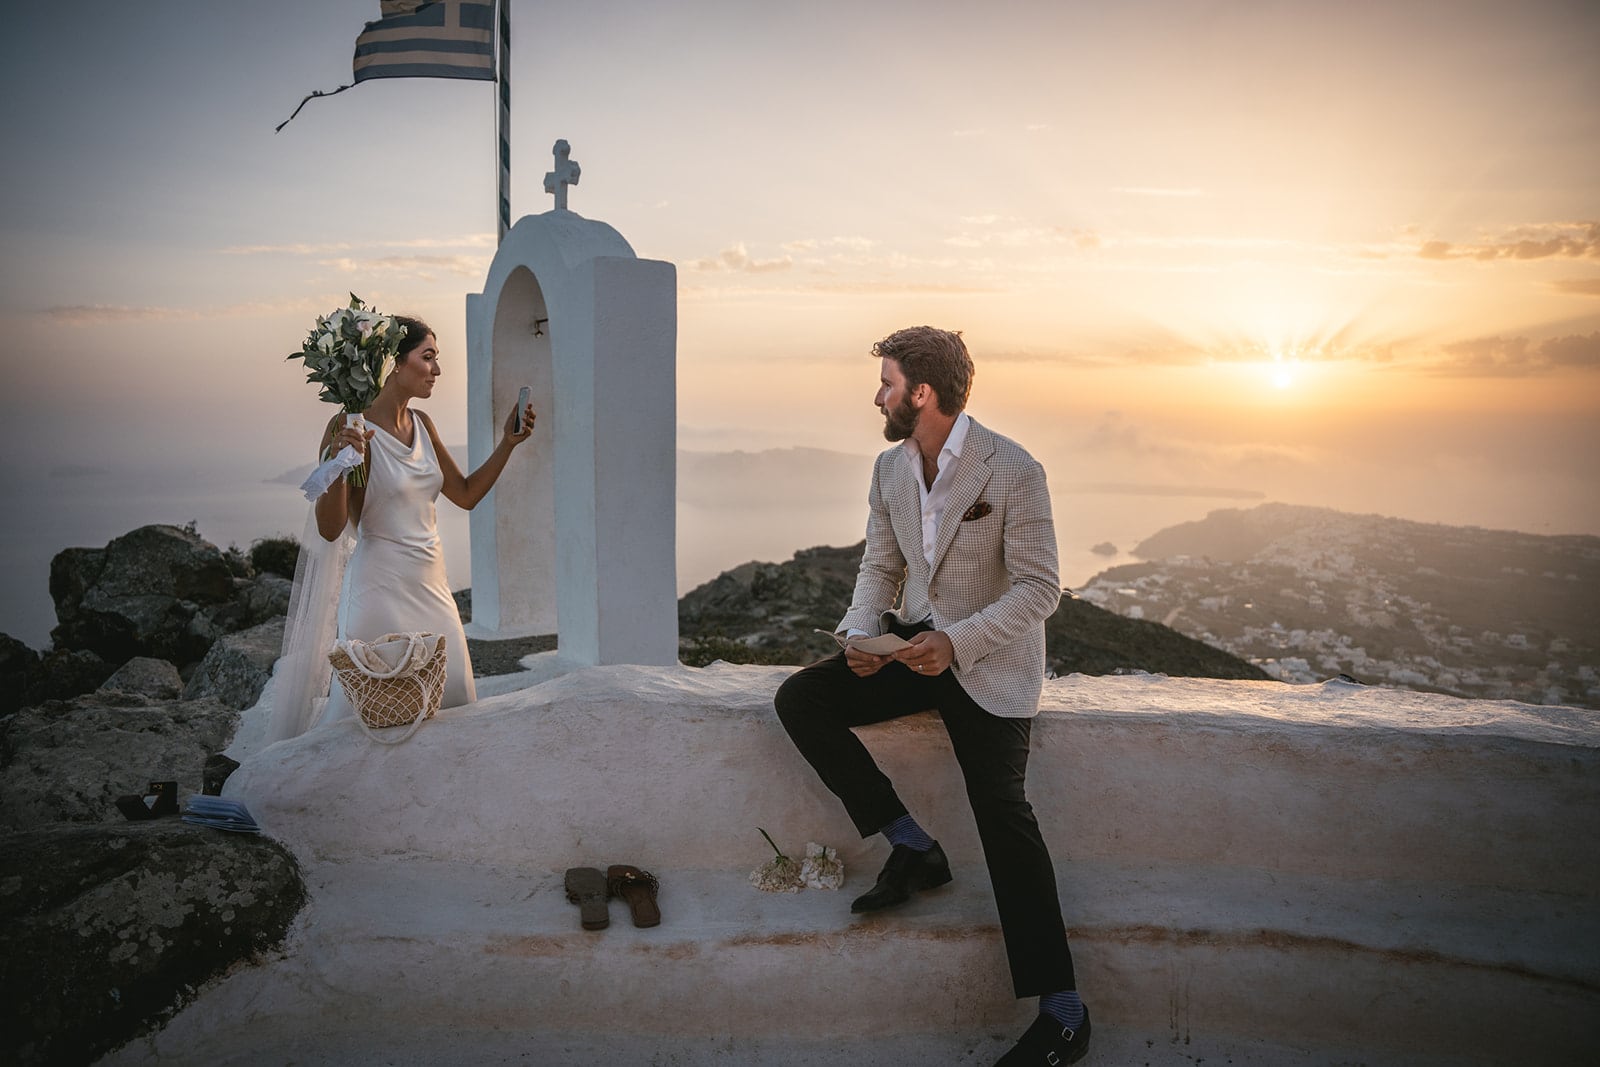 Santorini’s sky, ablaze with color, crowns their ceremony, the perfect start to forever